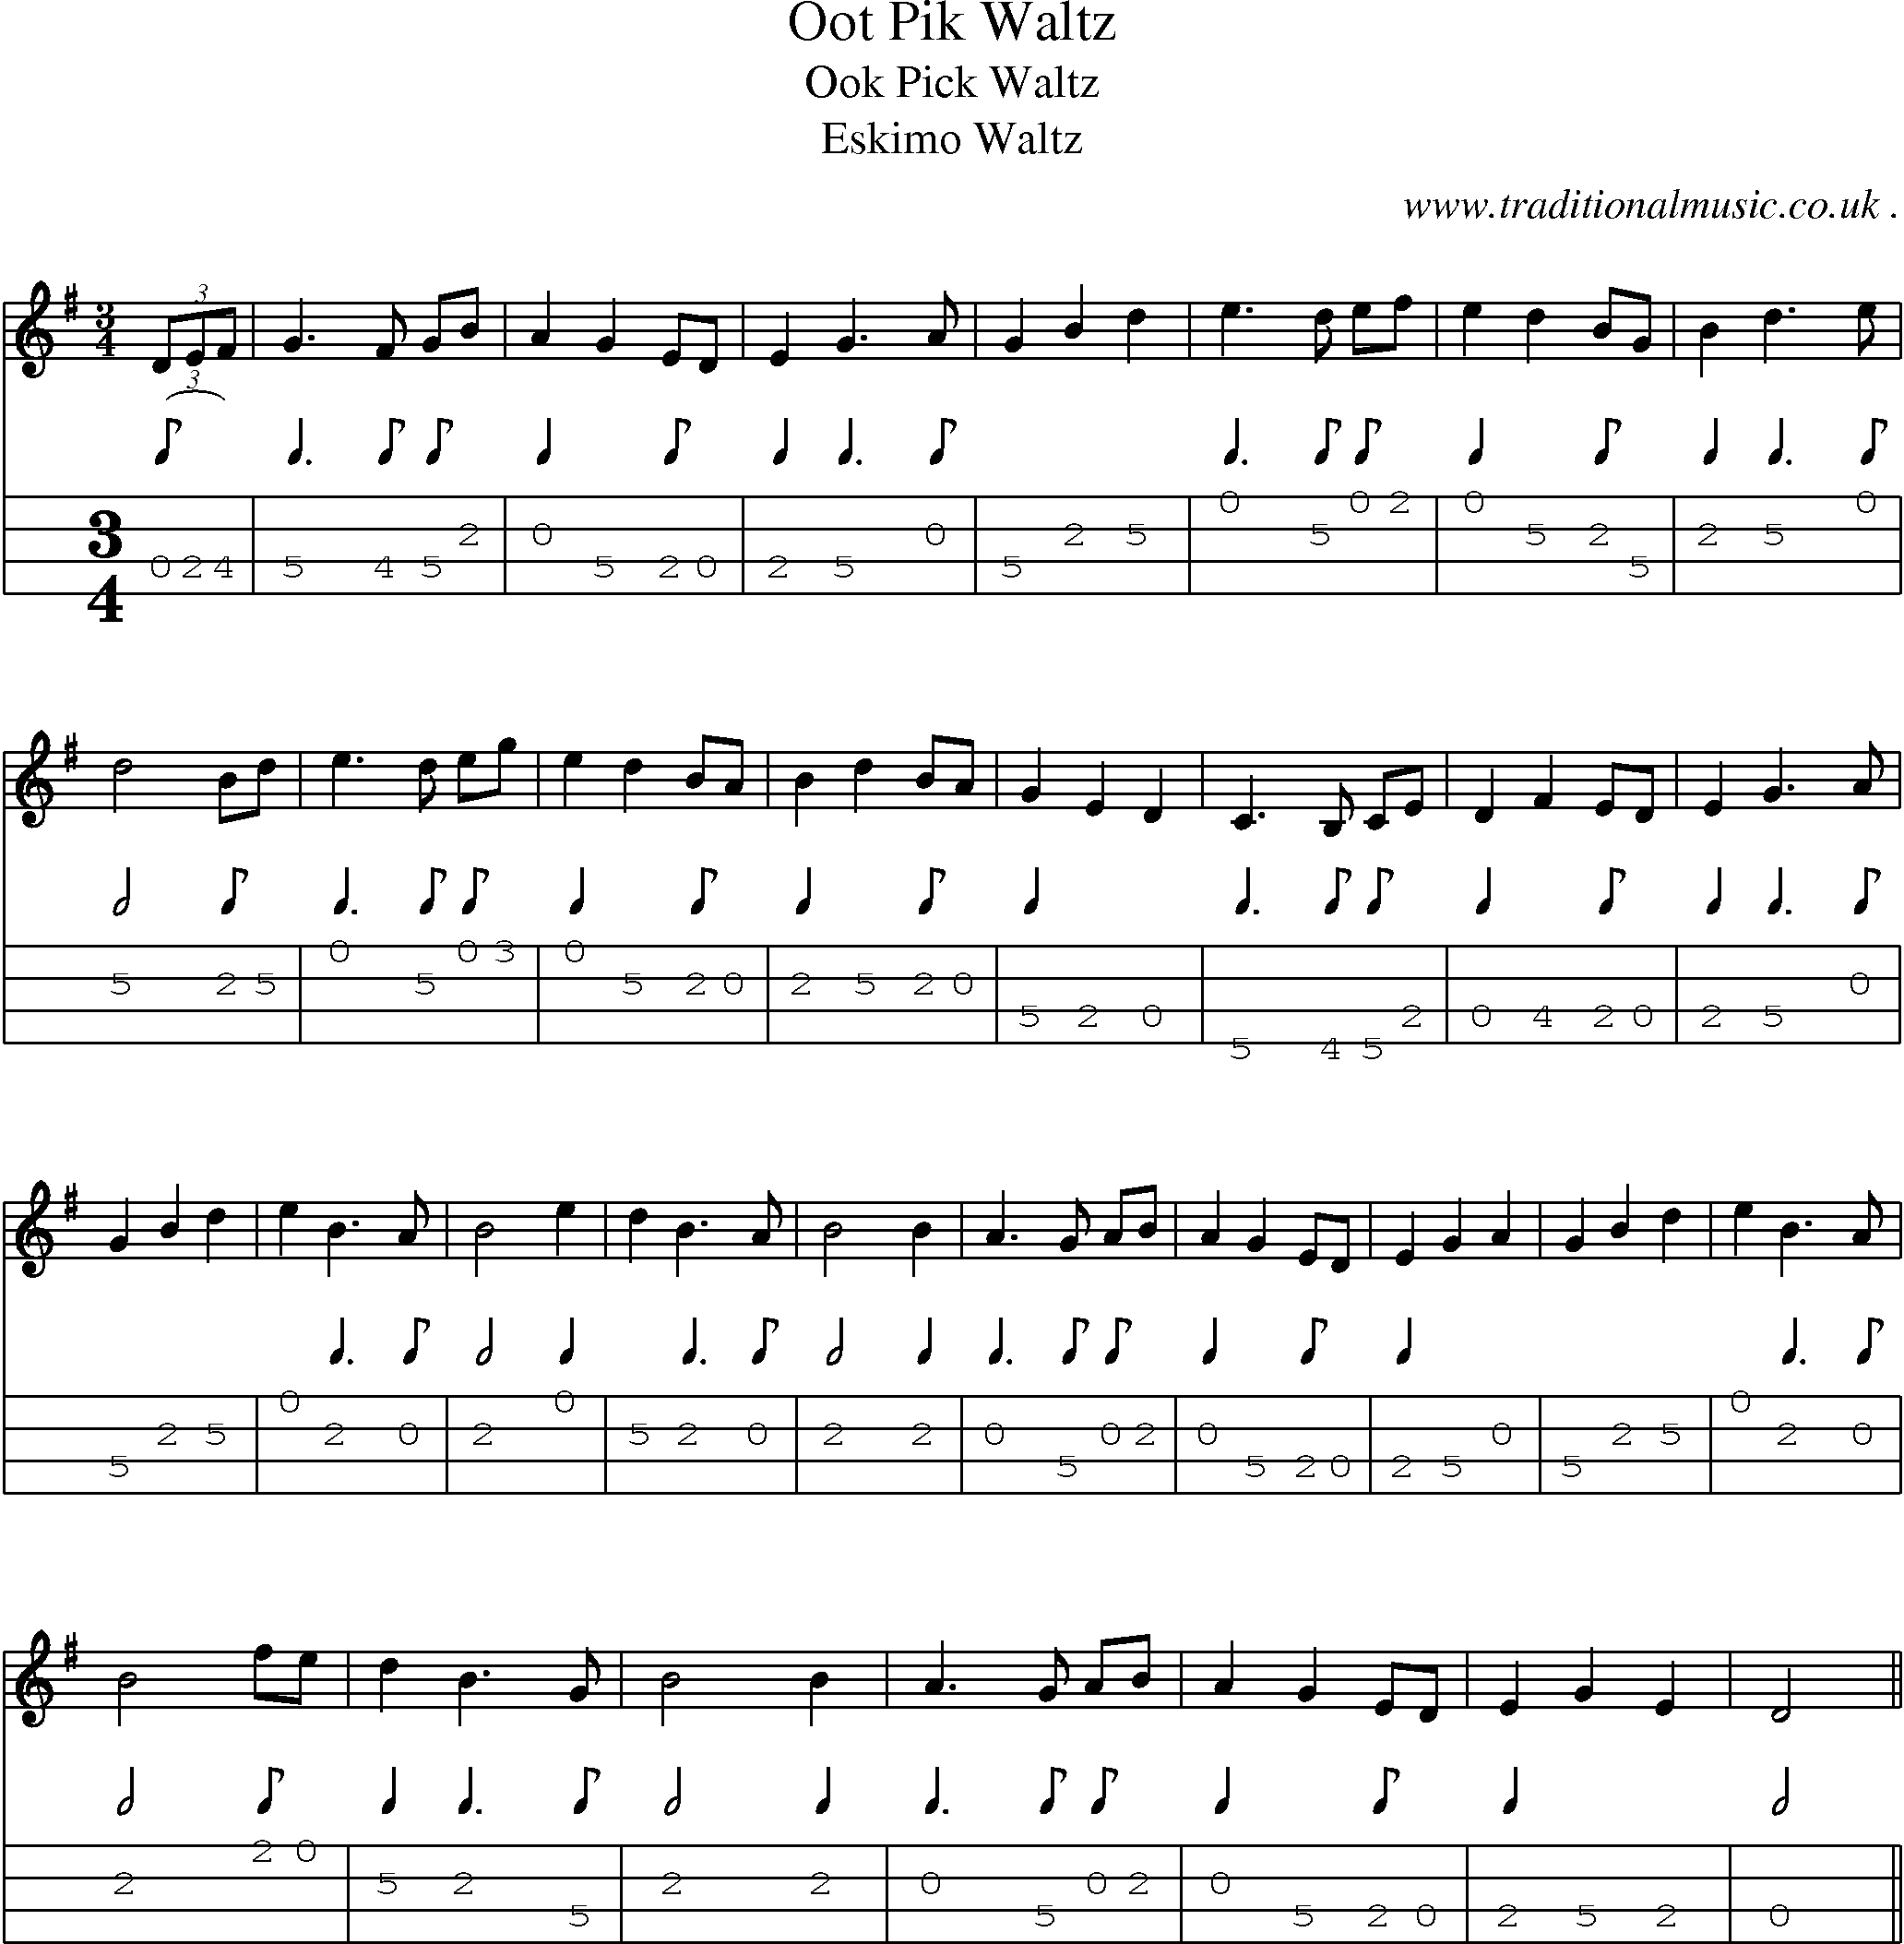 Sheet-Music and Mandolin Tabs for Oot Pik Waltz